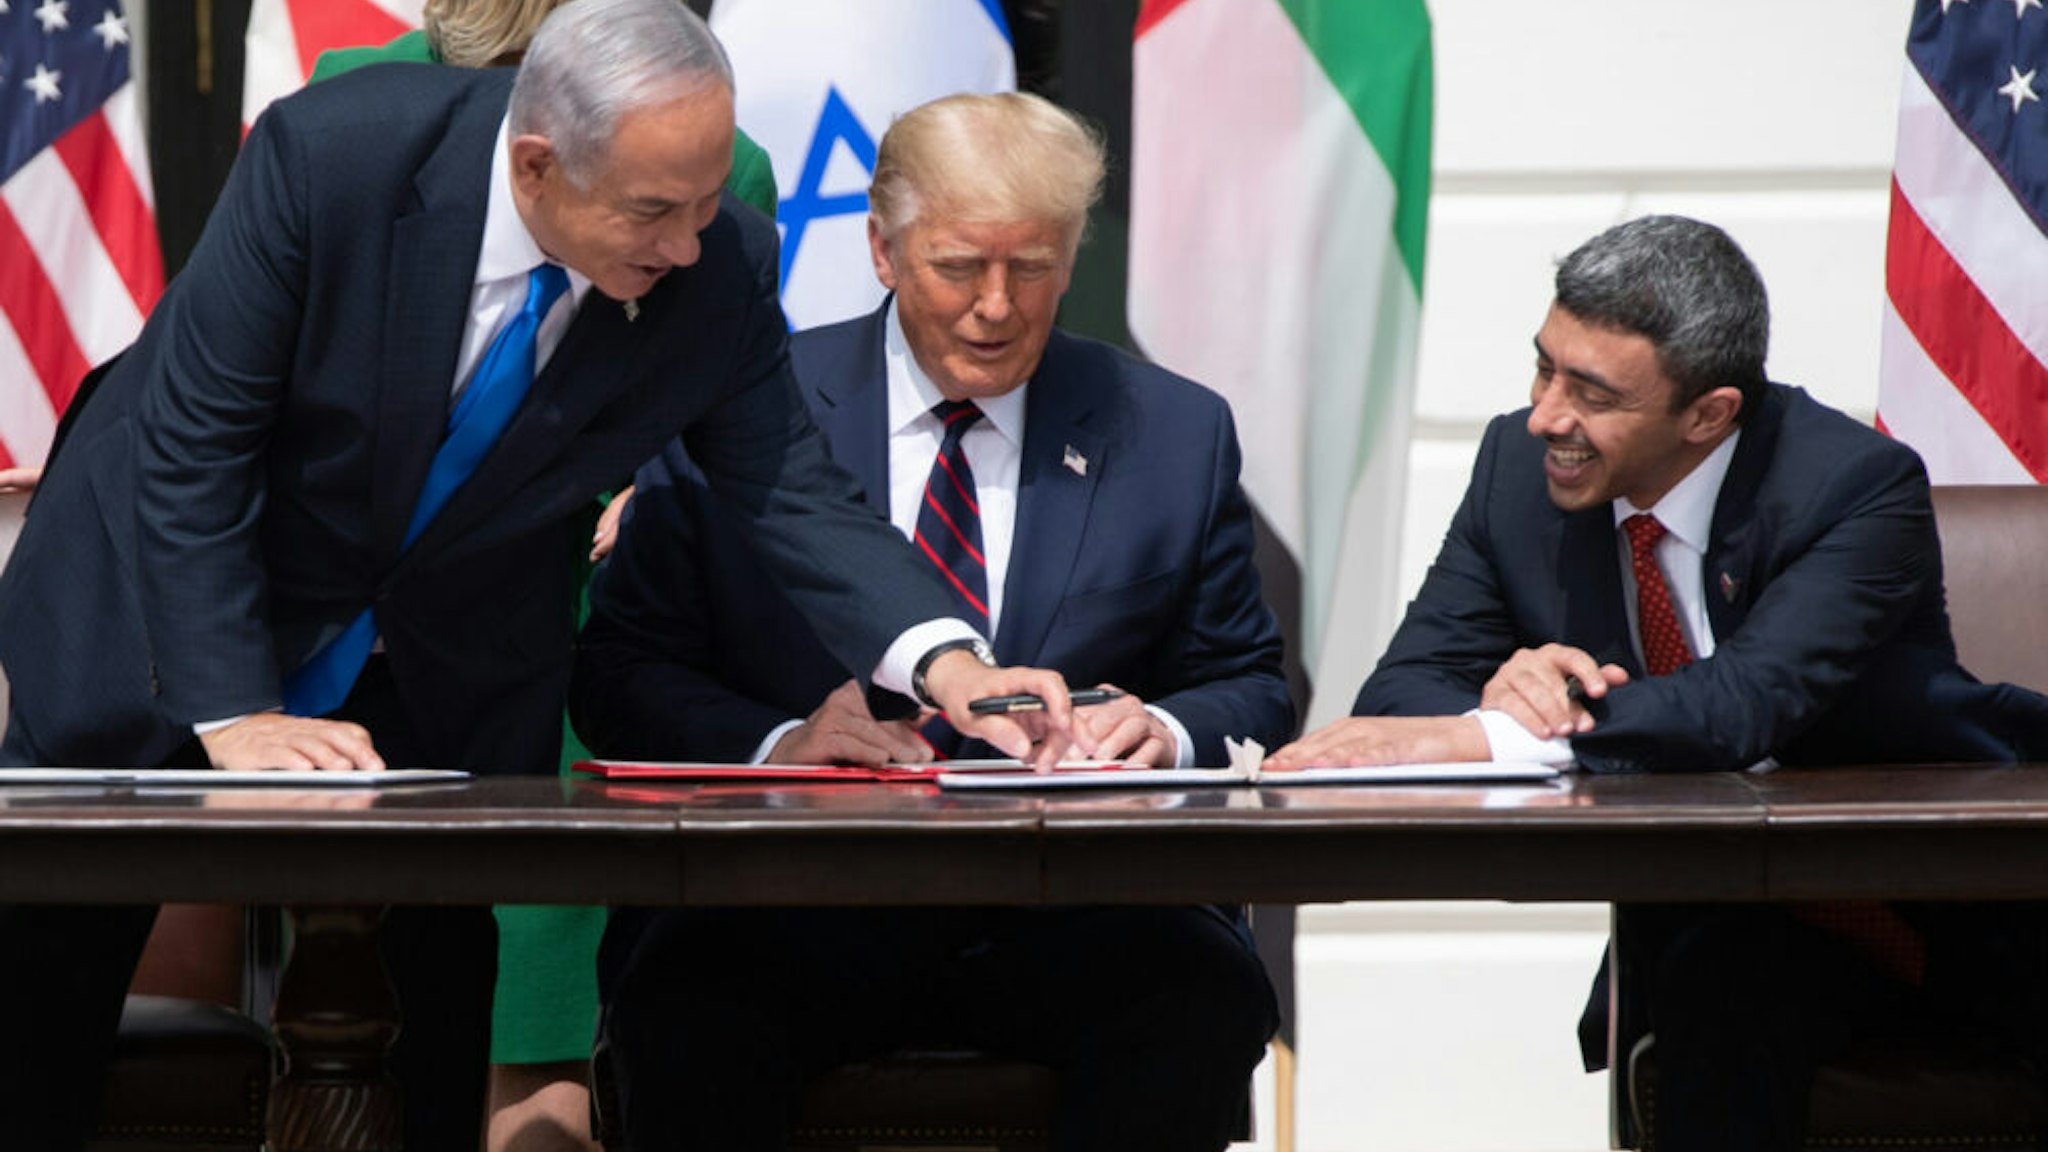 Israeli Prime Minister Benjamin Netanyahu(L), US President Donald Trump, and UAE Foreign Minister Abdullah bin Zayed Al-Nahyan(R)smile as they participate in the signing of the Abraham Accords where the countries of Bahrain and the United Arab Emirates recognize Israel, at the White House in Washington, DC, September 15, 2020. - Israeli Prime Minister Benjamin Netanyahu and the foreign ministers of Bahrain and the United Arab Emirates arrived September 15, 2020 at the White House to sign historic accords normalizing ties between the Jewish and Arab states.